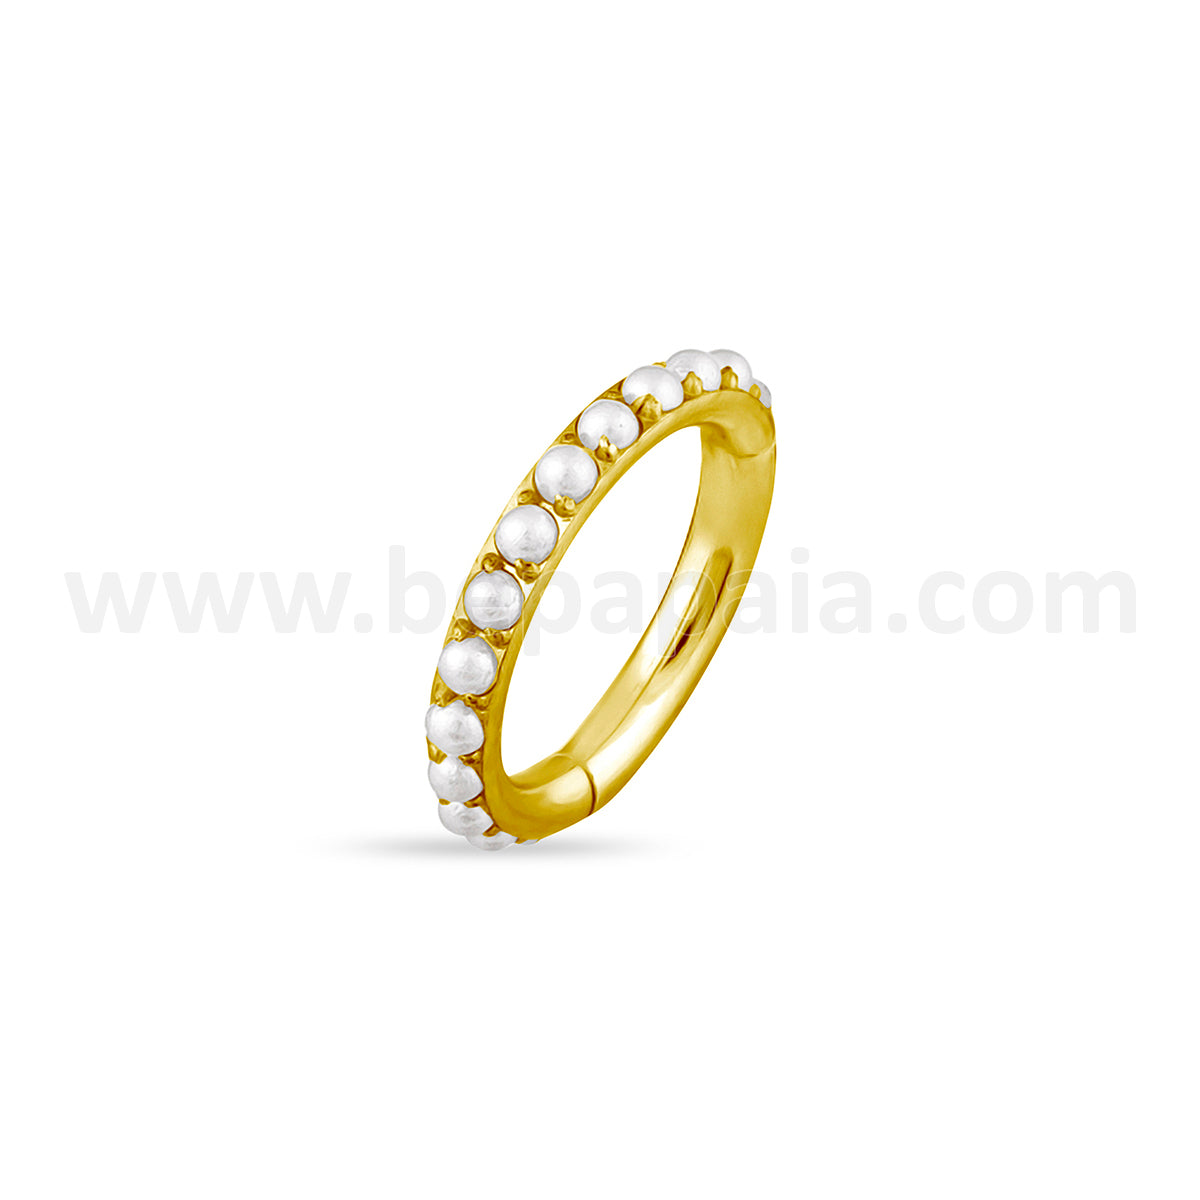 Segment ring with pearls 